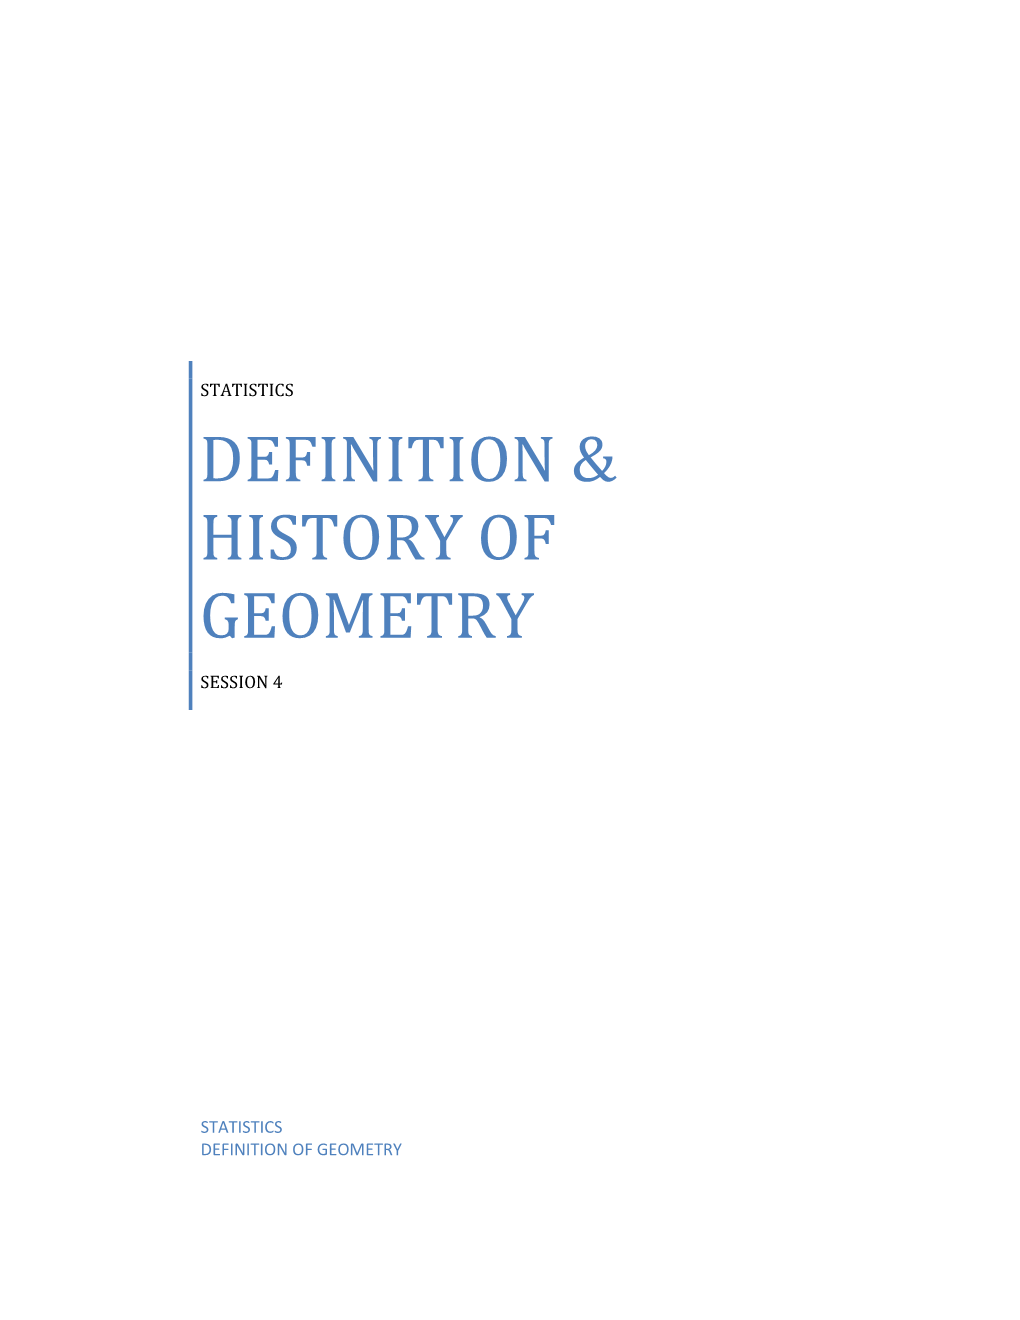 Definition & History of Geometry